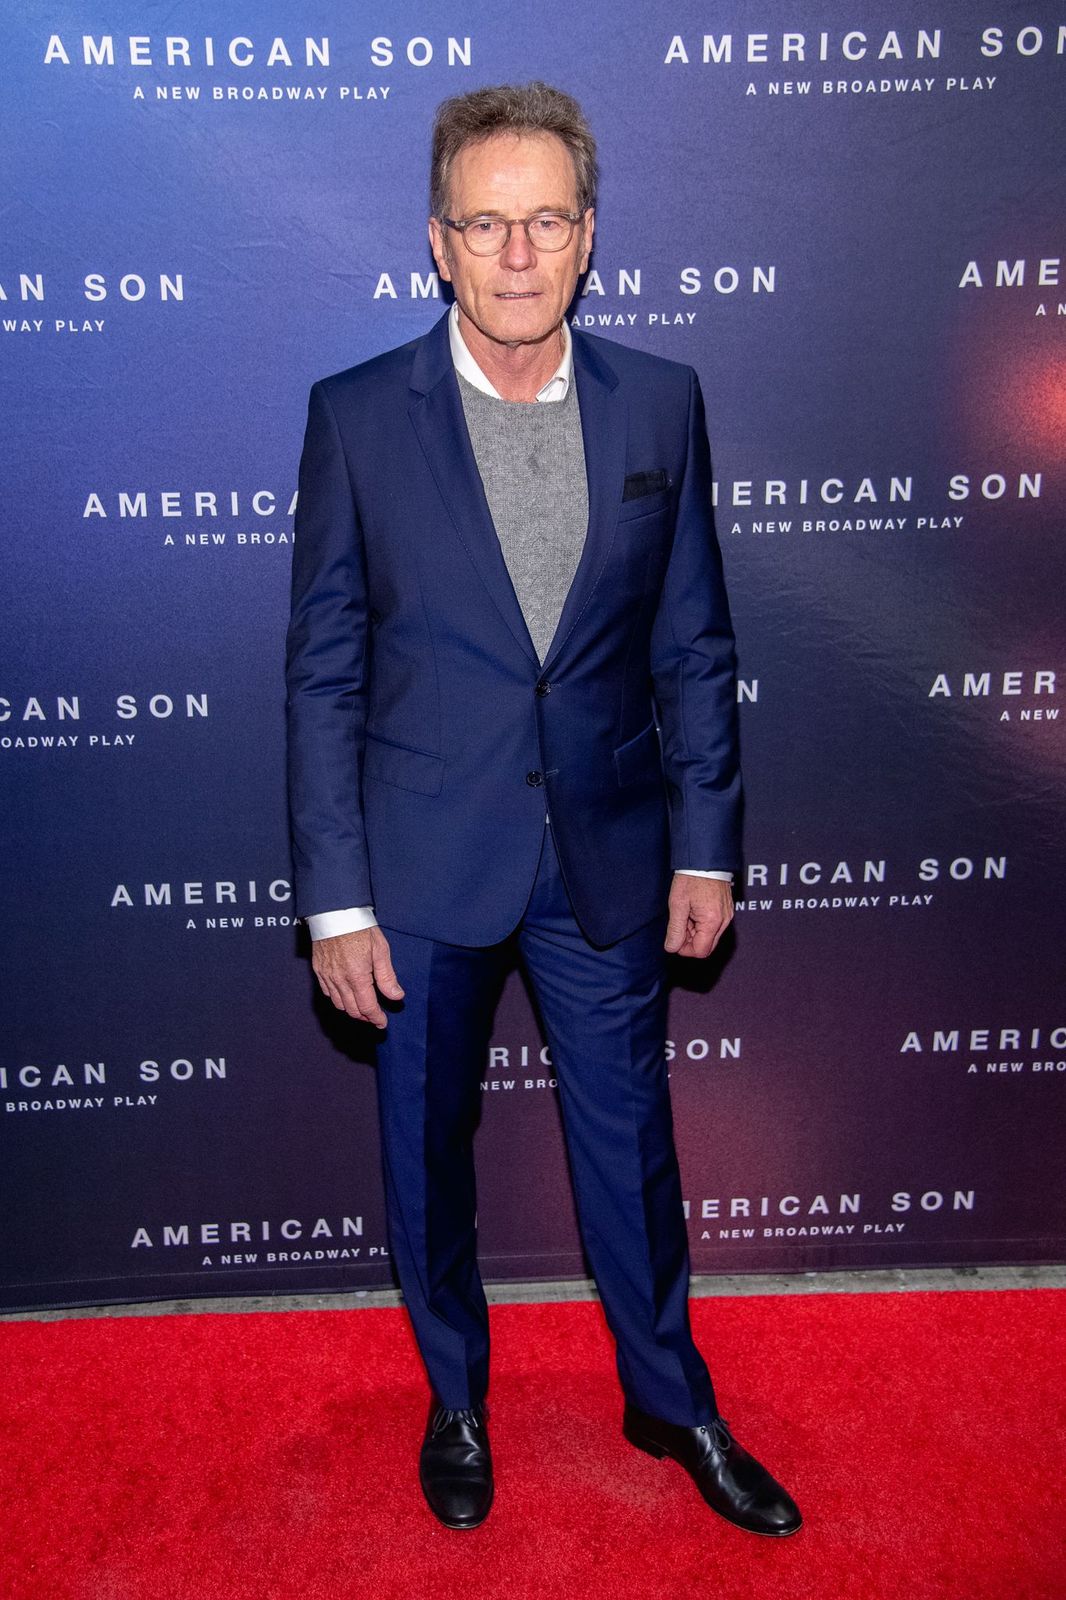 Bryan Cranston at the opening night of "American Son" on November 04, 2018, in New York City | Photo: Roy Rochlin/Getty Images